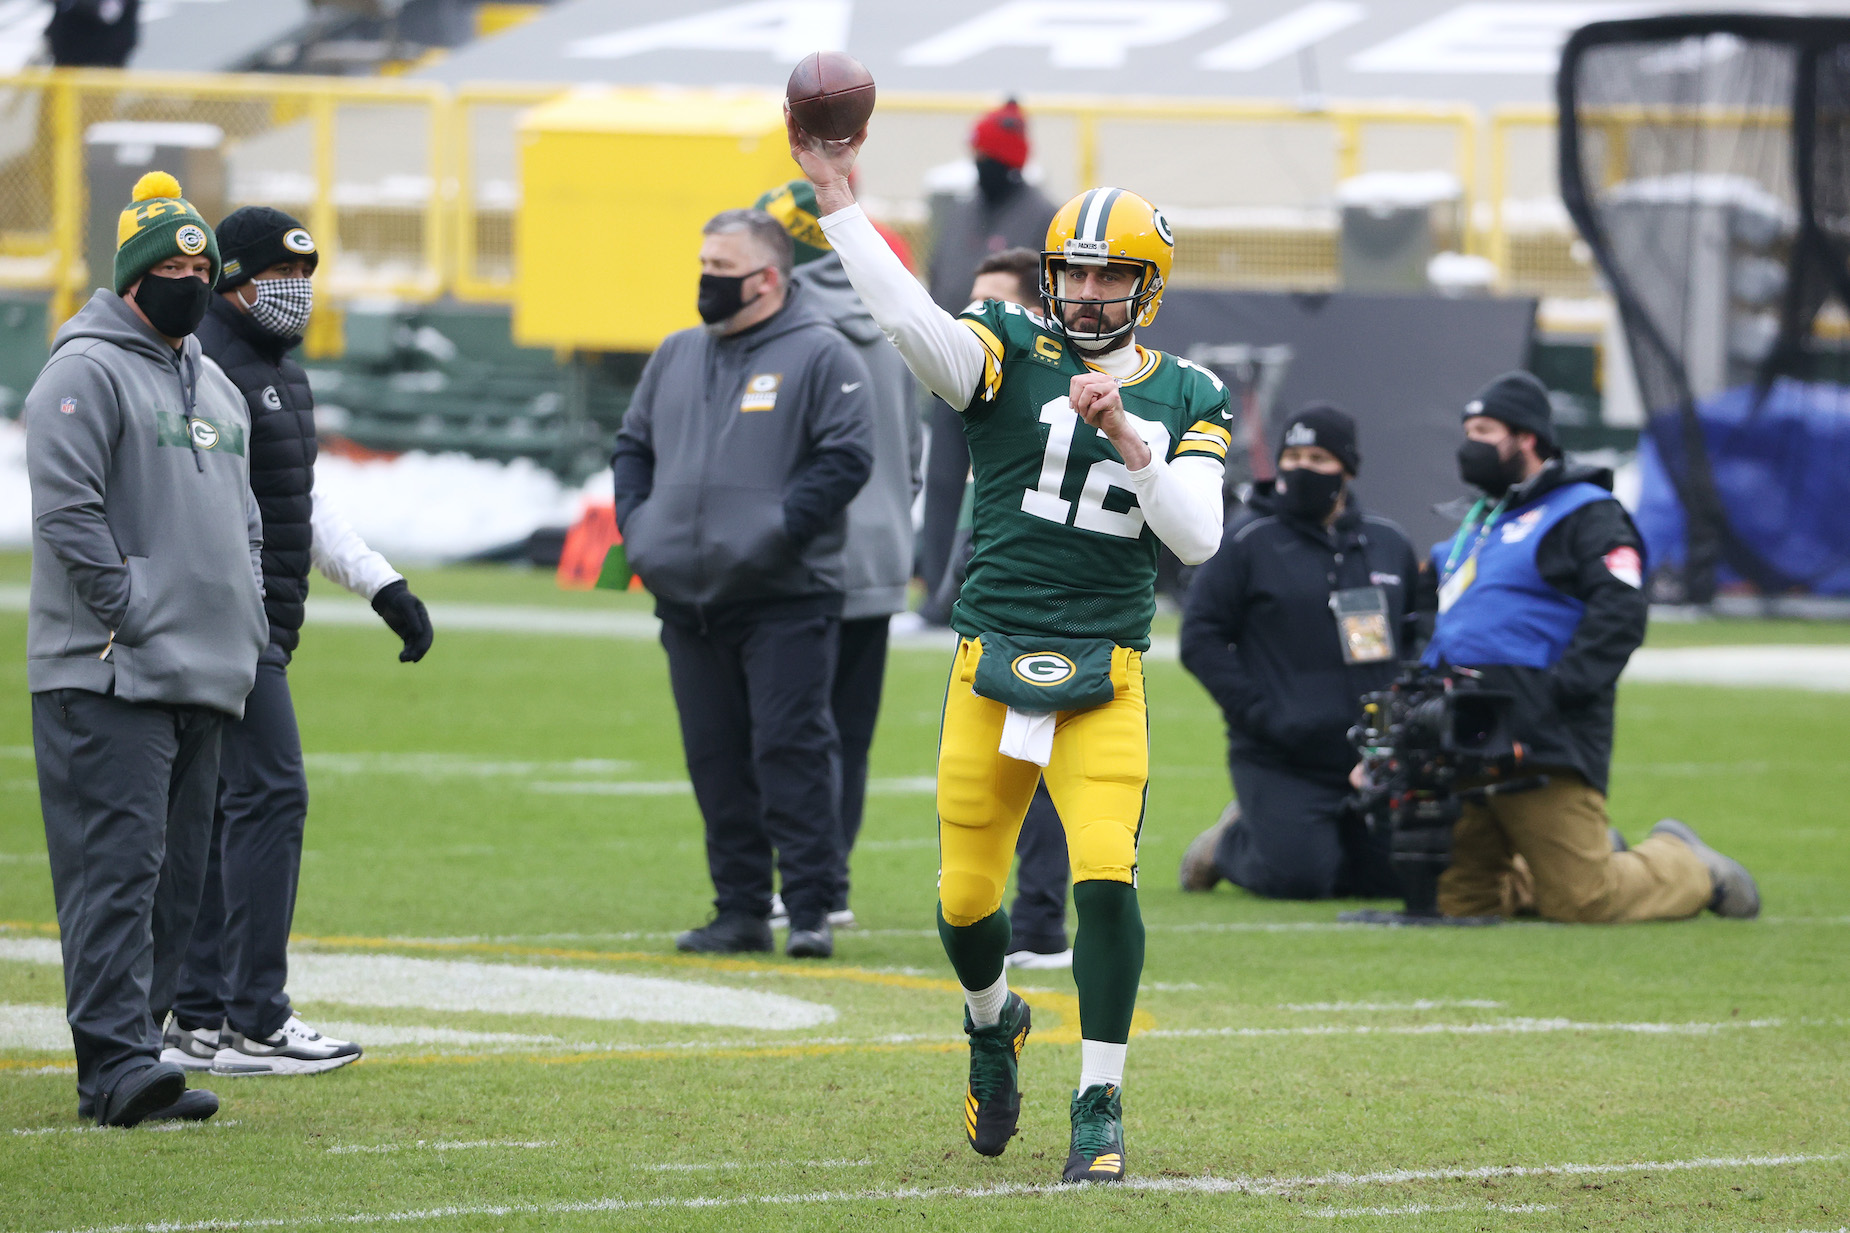 Green Bay Packers quarterback and Jeopardy guest host Aaron Rodgers warms up ahead of the 2020 NFC Championship game.